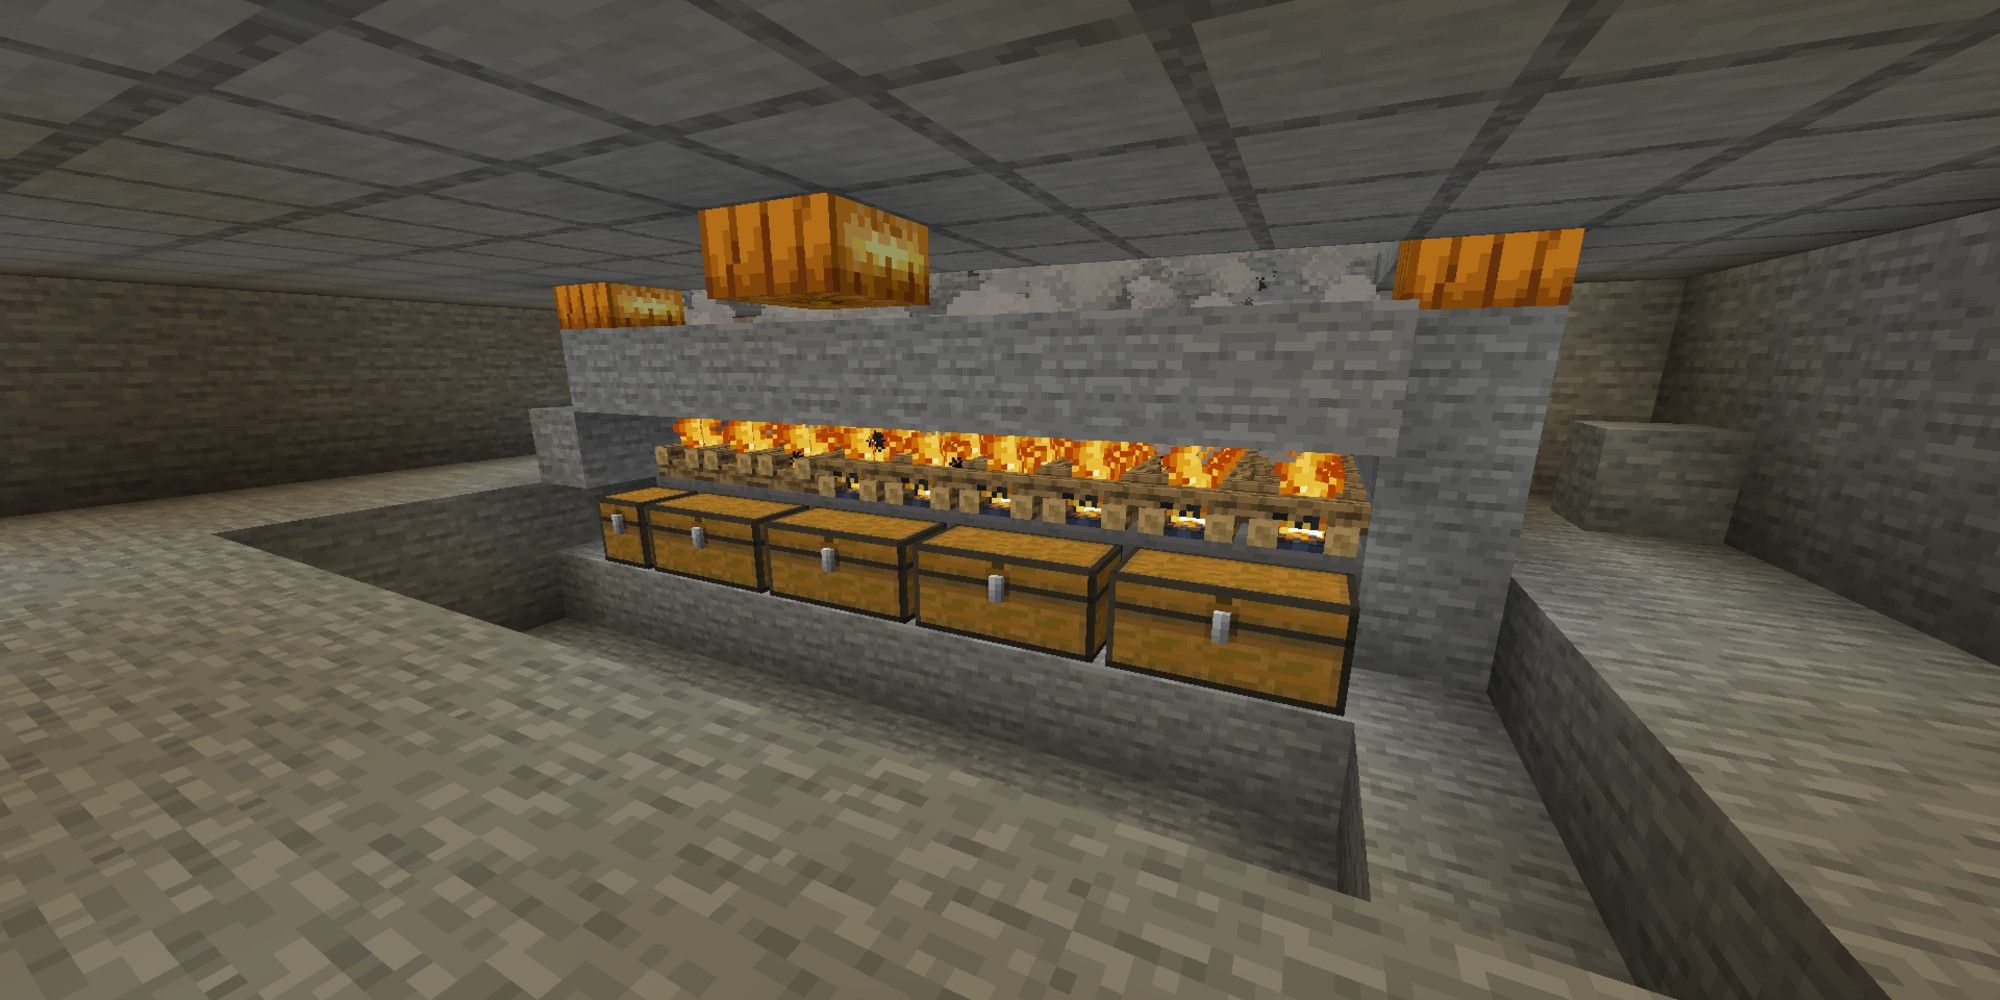 underside of minecraft slime farm with chests, hoppers, and campfires